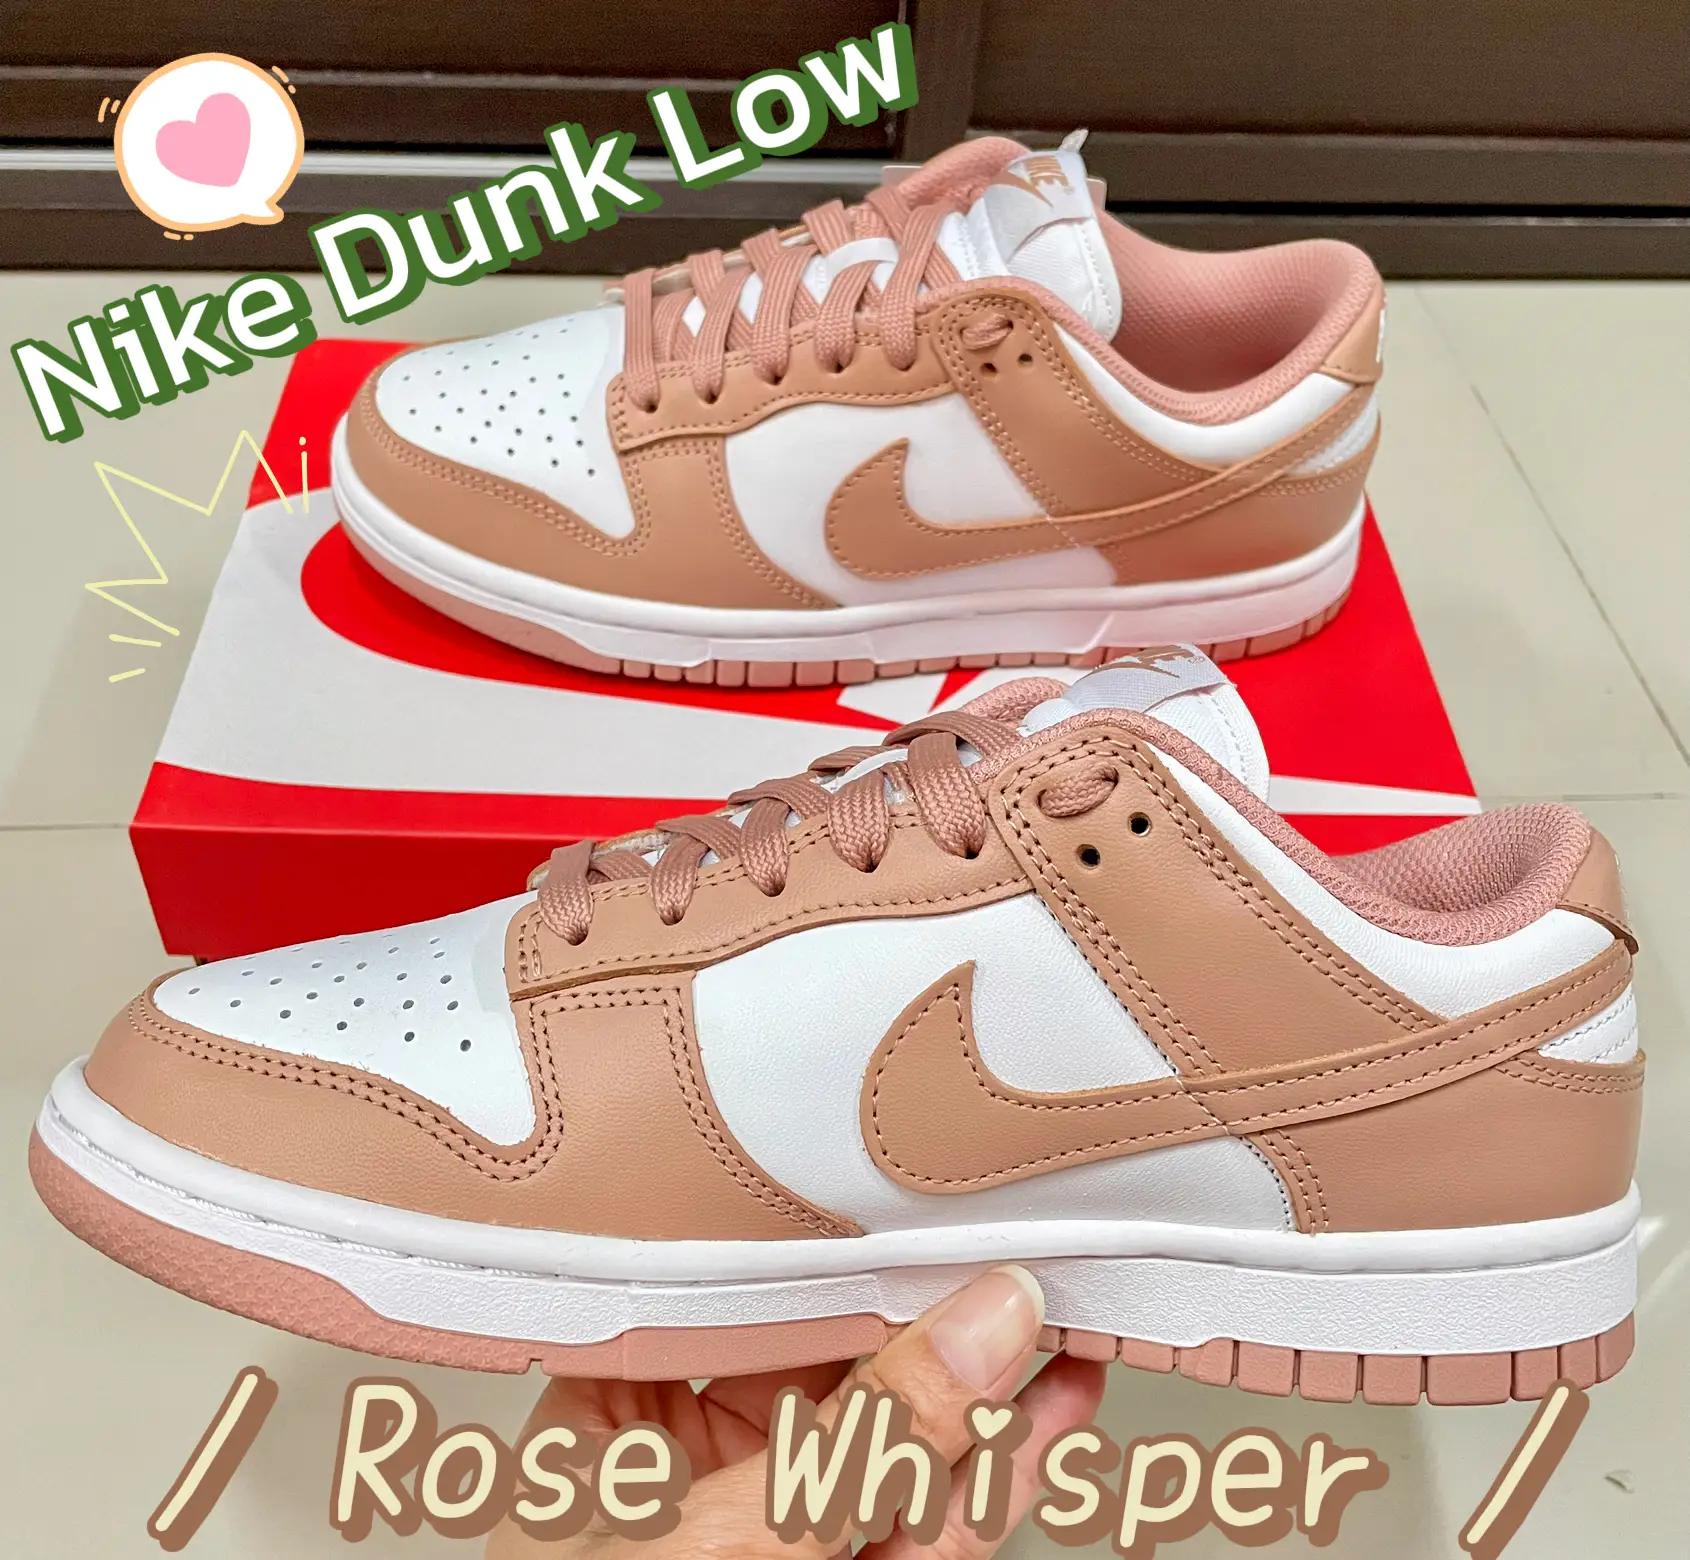 Nike Dunk Low Rose Whisper 🌷 How to Get the Label Price | Gallery ...